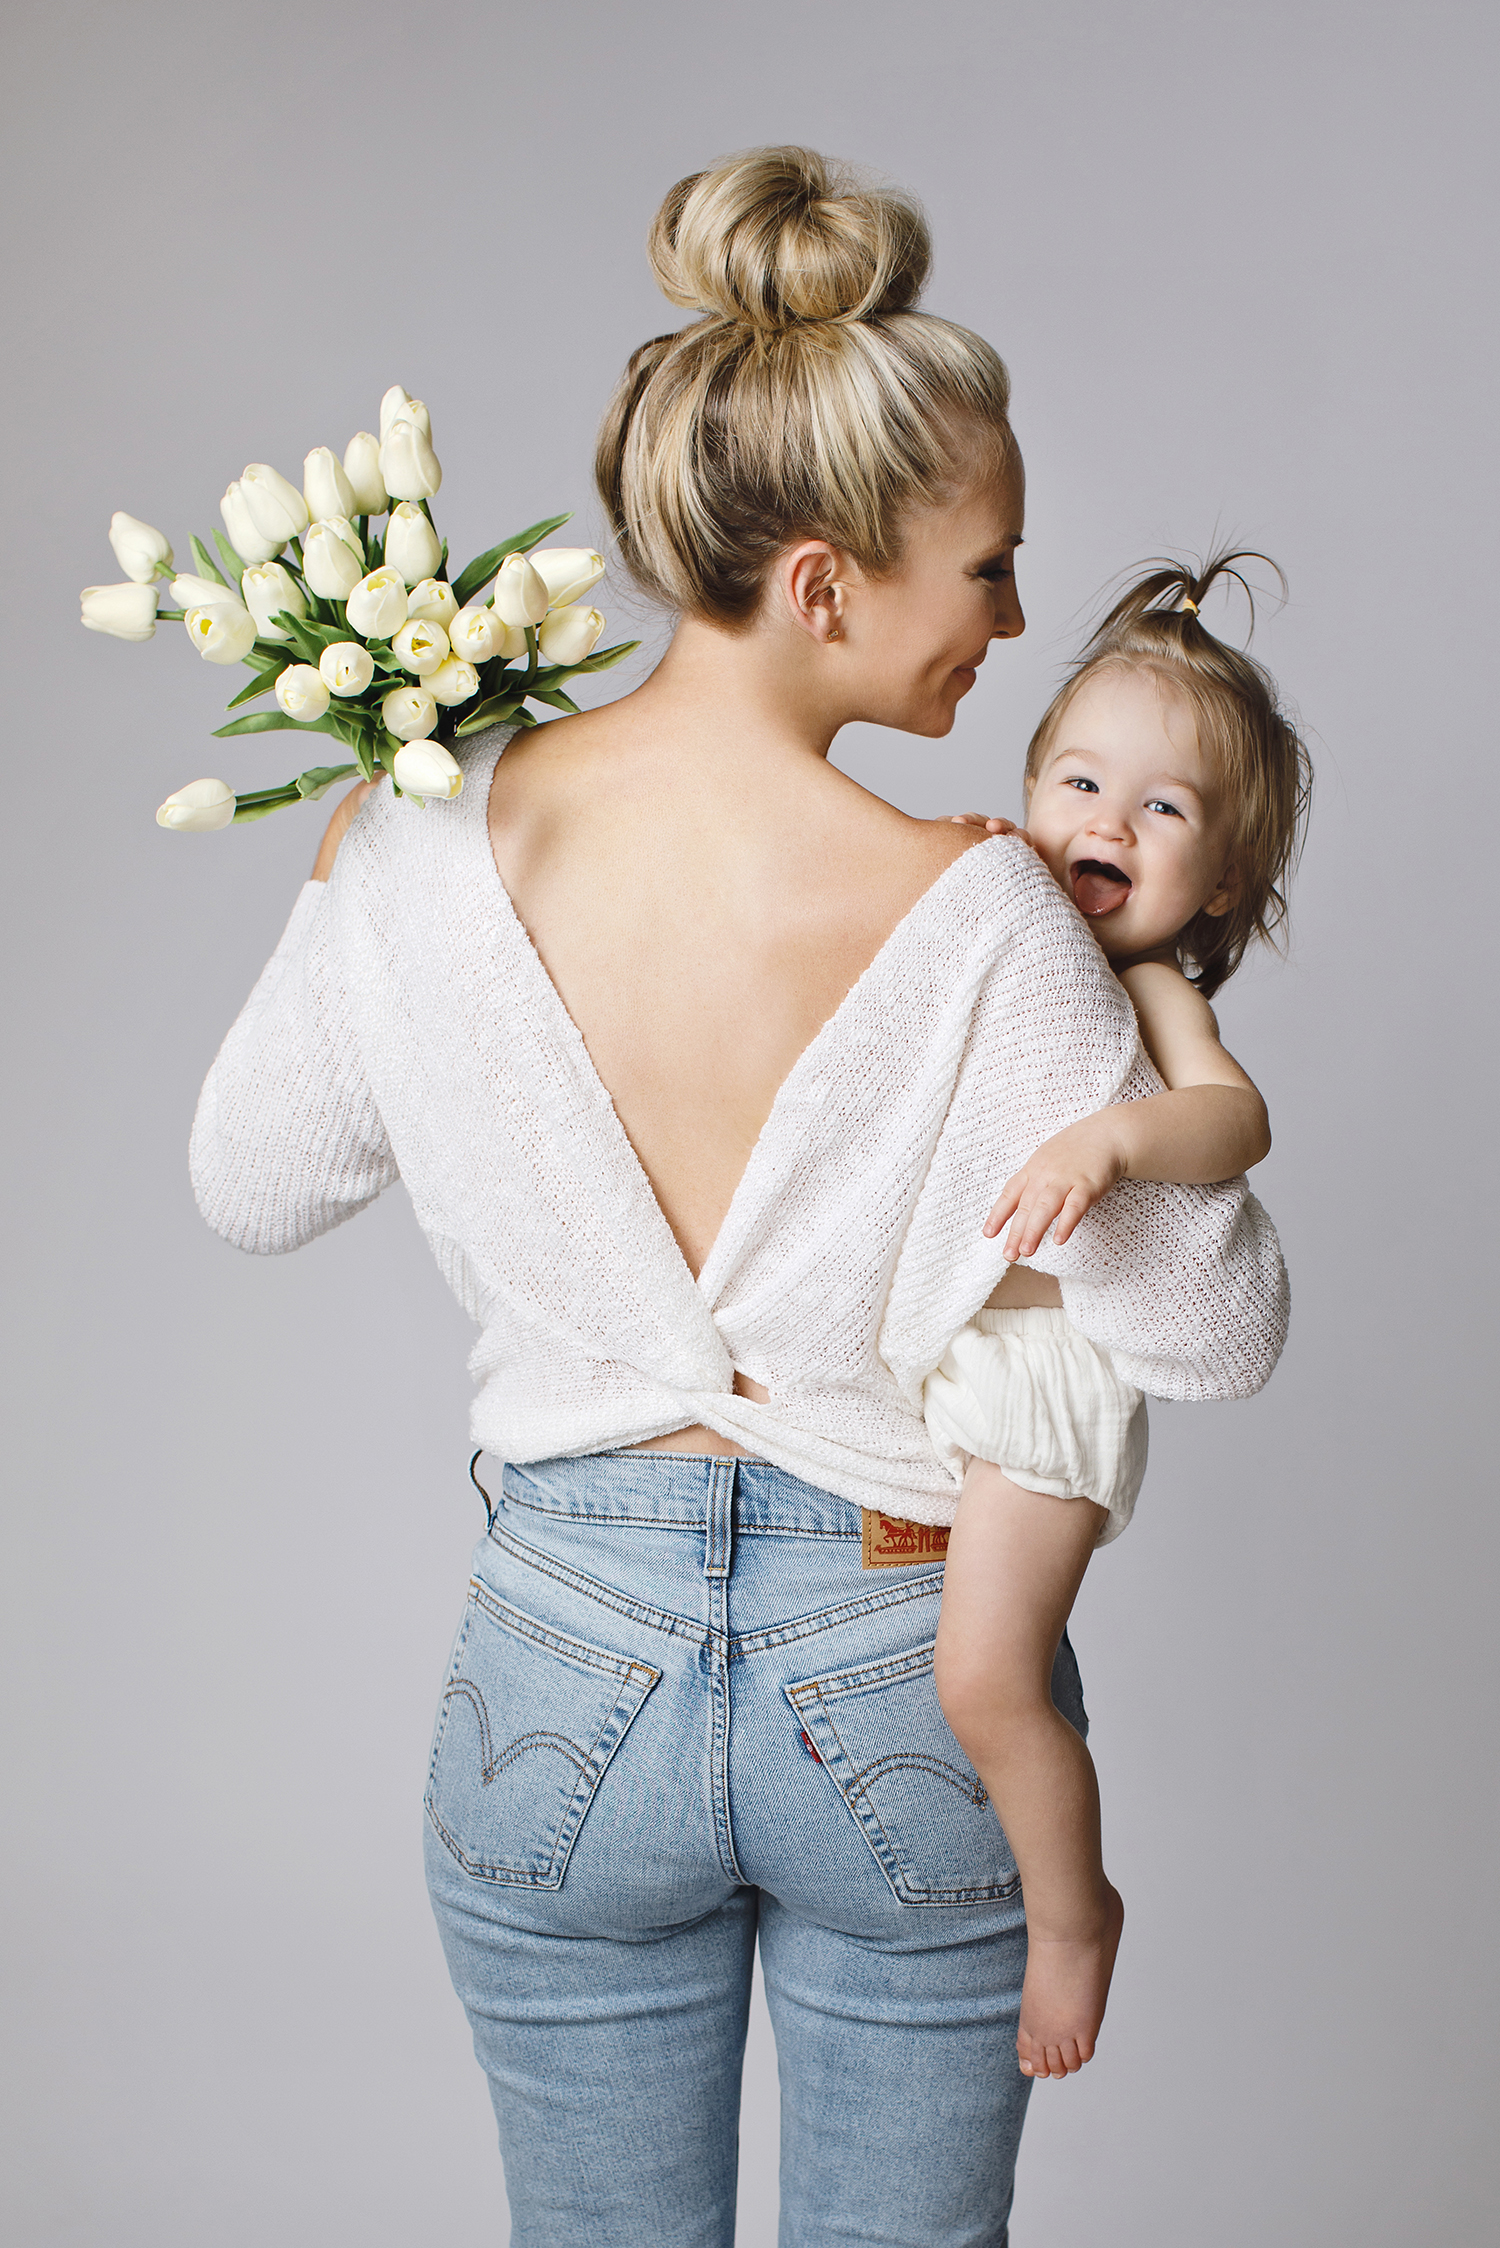 Mom and baby in a relaxed and stylish photoshoot with flowers